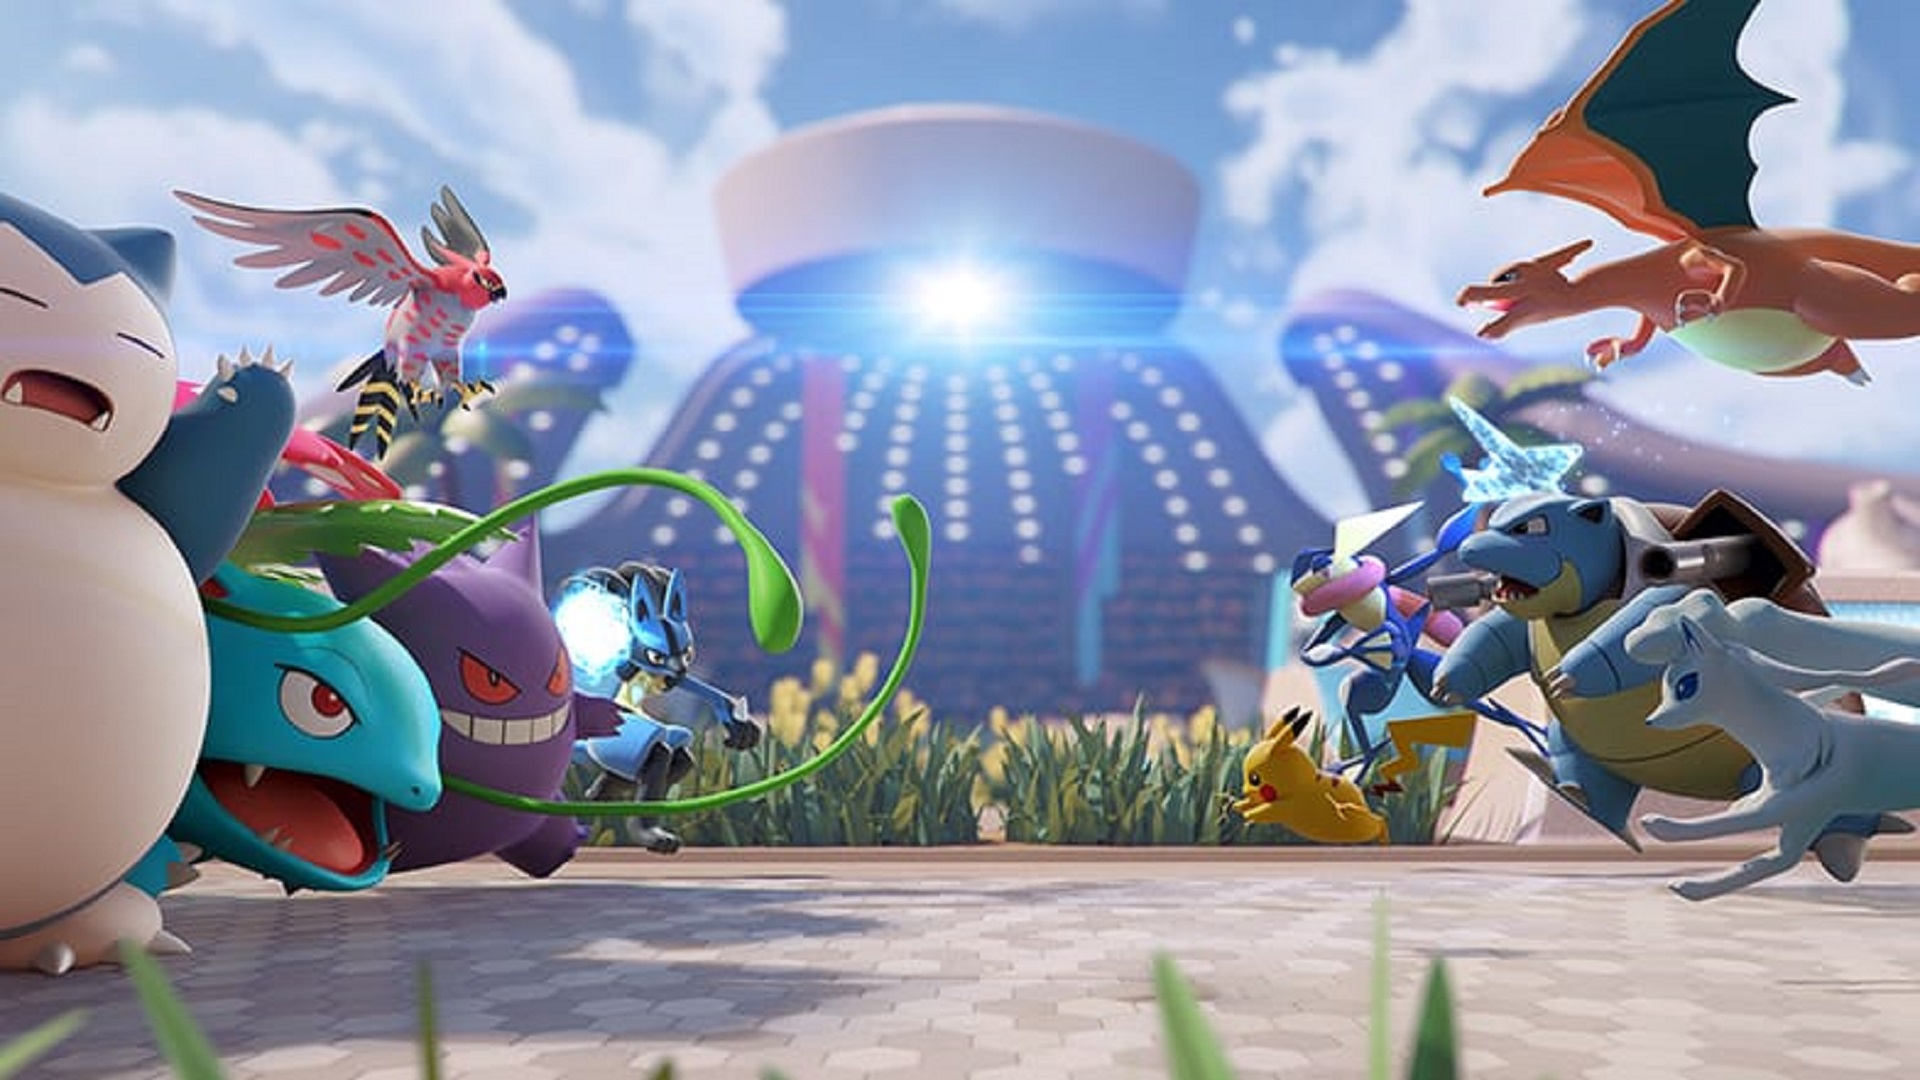 Pokémon Unite Is Getting A Game Update, Here Are The Full Patch Notes